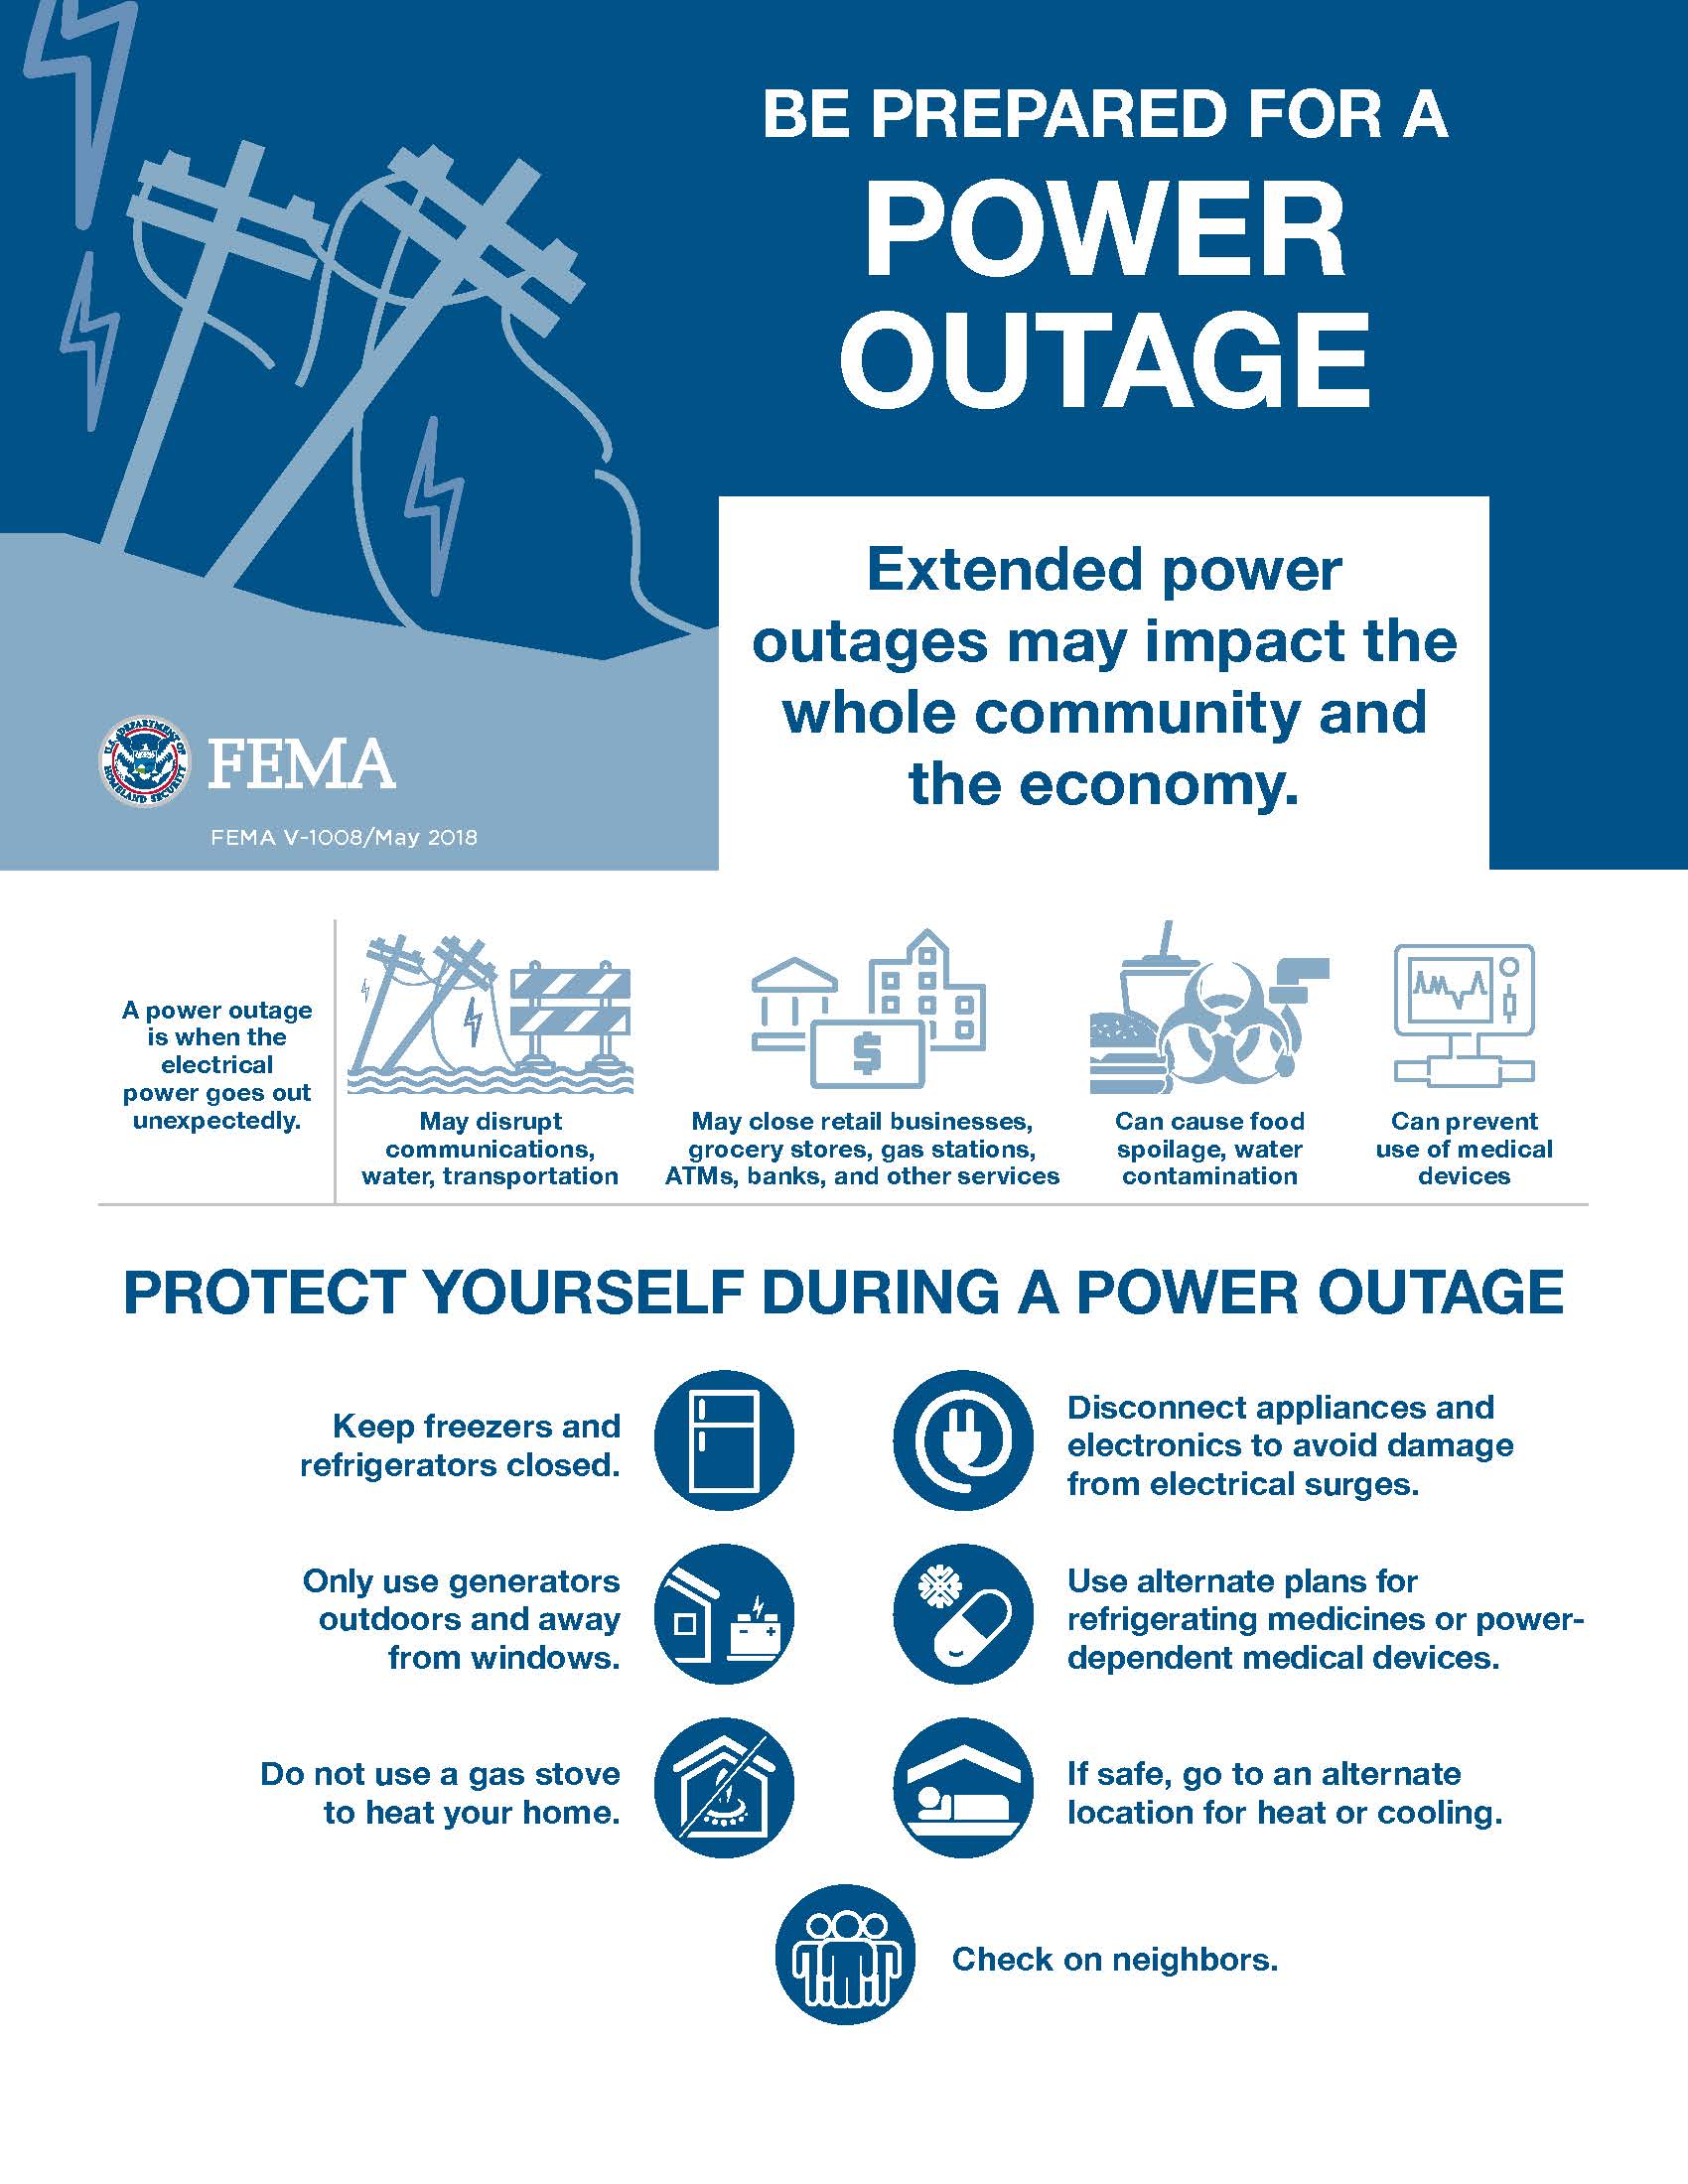 Be Prepared for a power outage